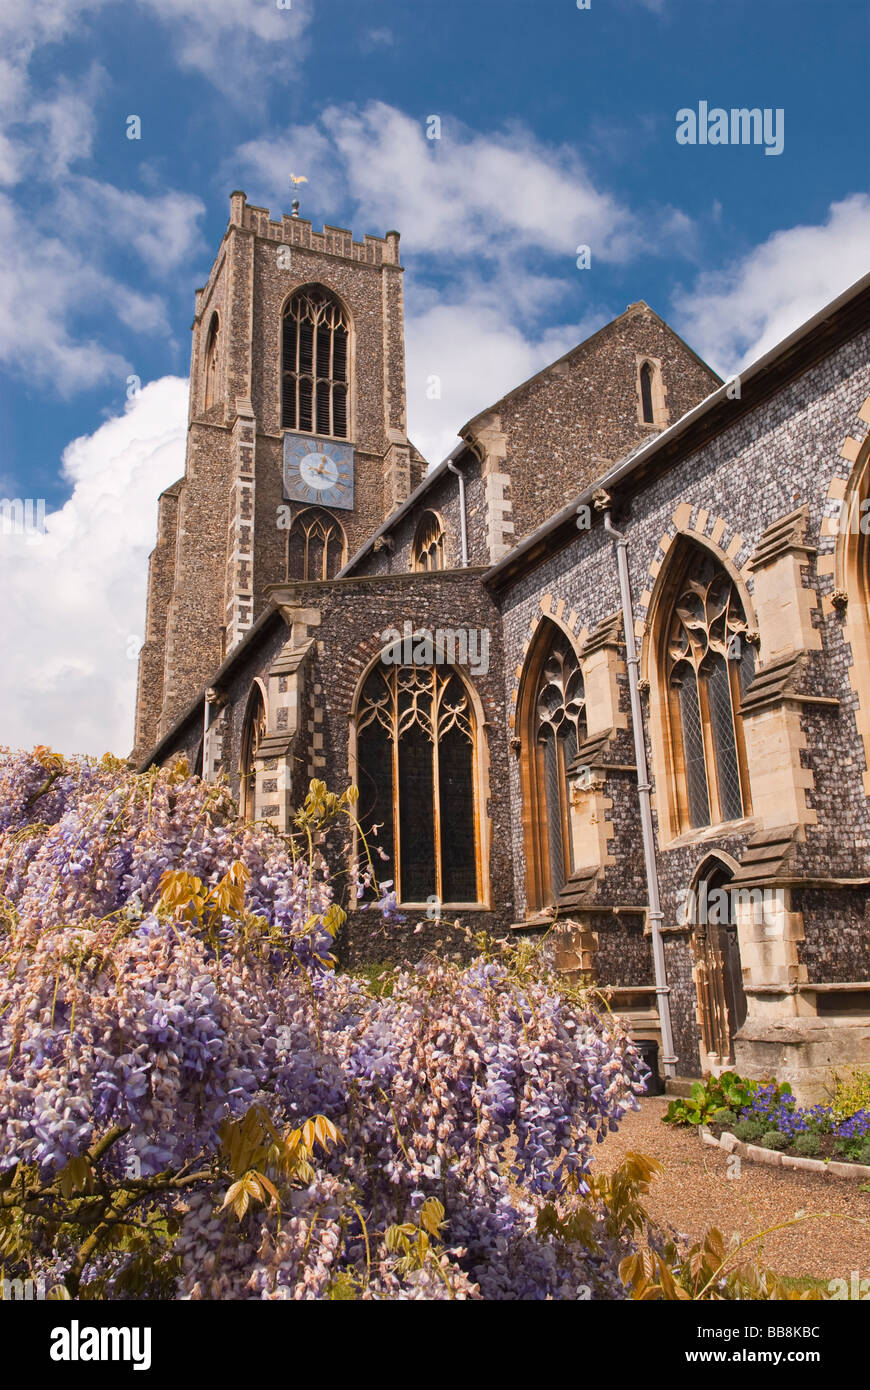 A church and clock tower in Norwich,Norfolk,Uk Stock Photo